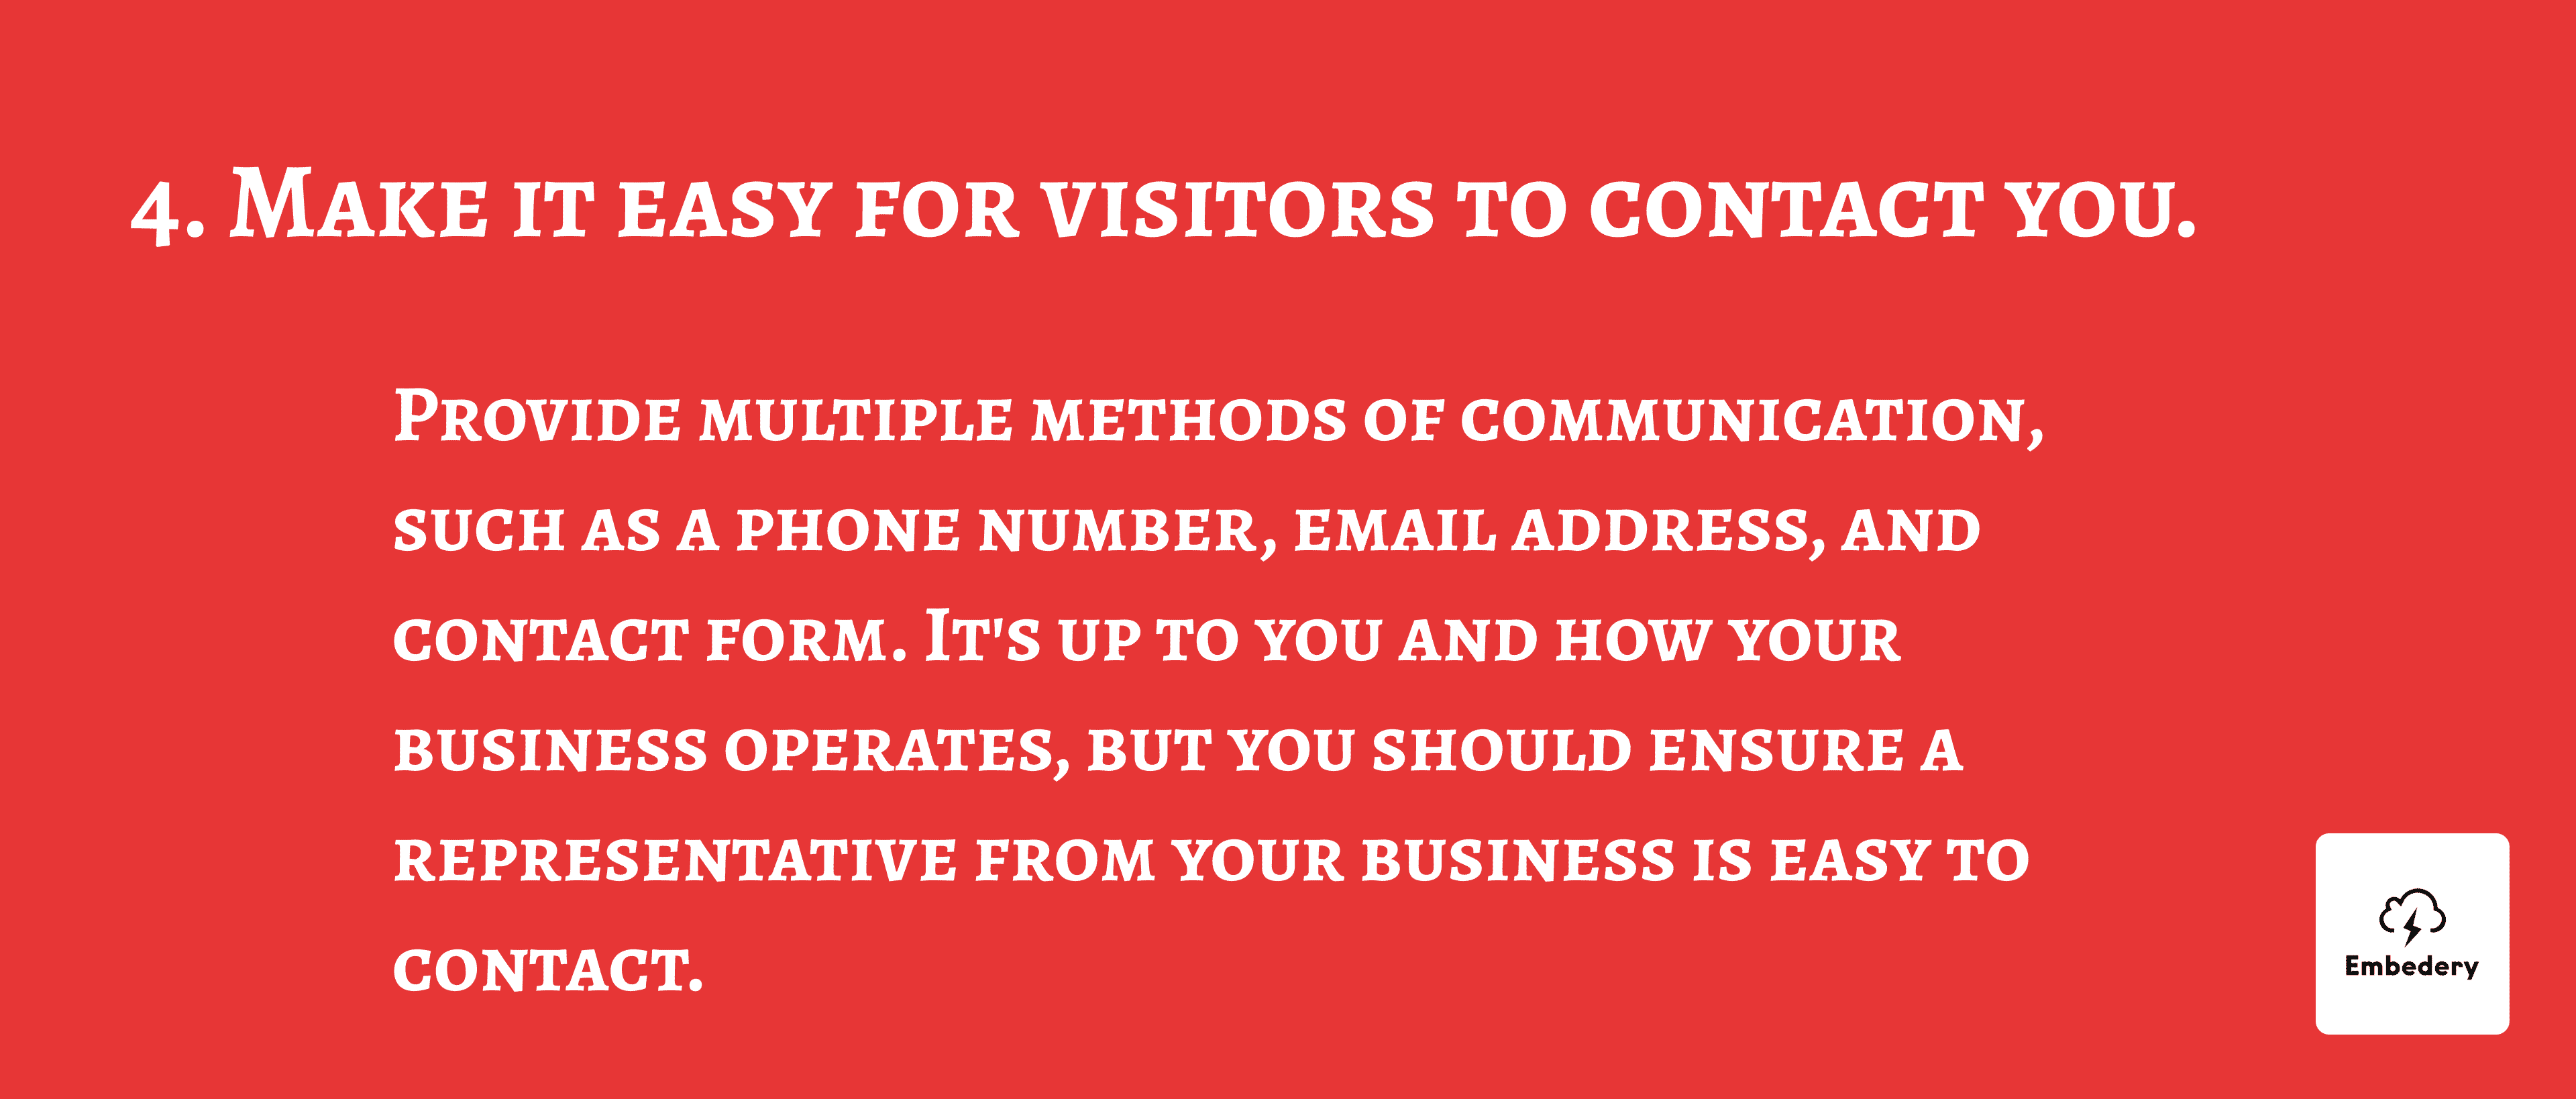 Make it easy for visitors to contact you